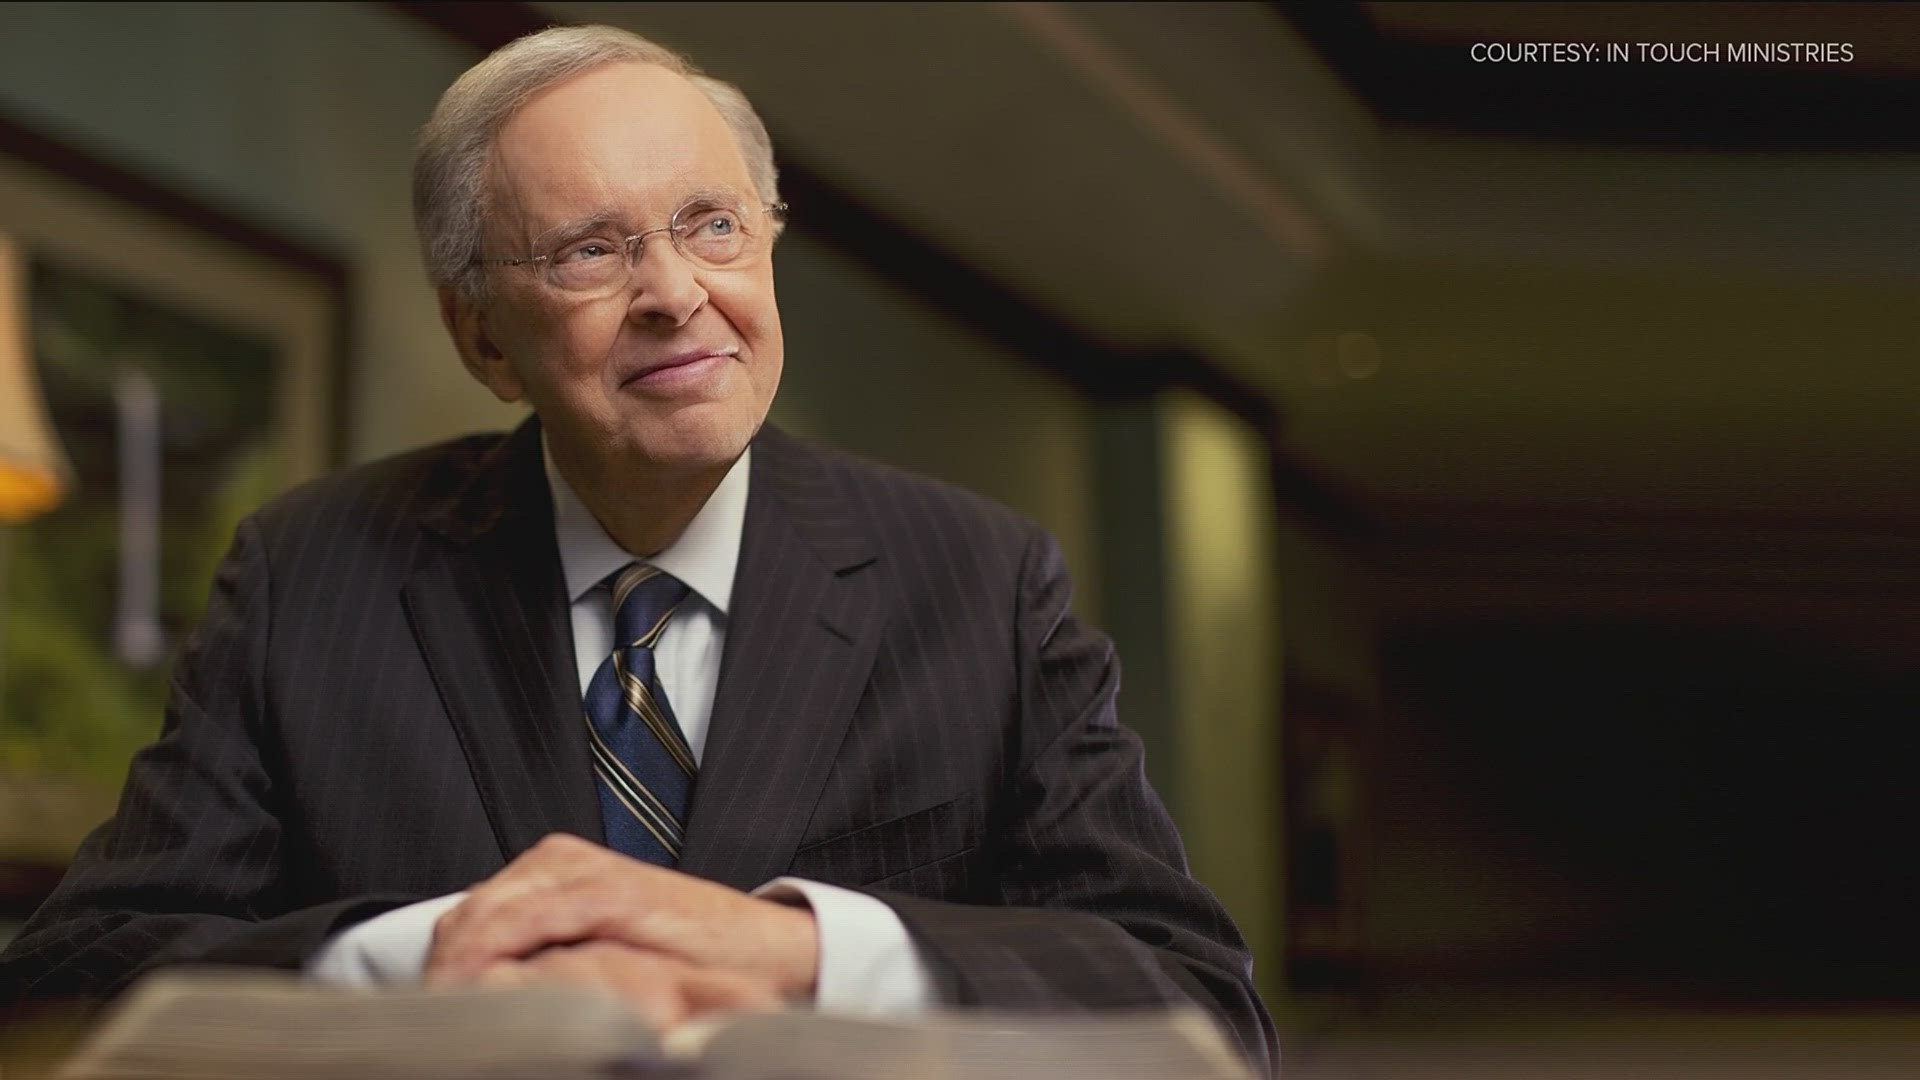 Dr. Charles Stanley who was a powerful pastor at the First Baptist Church of Atlanta. His organization In Touch Ministries reached millions across the world.